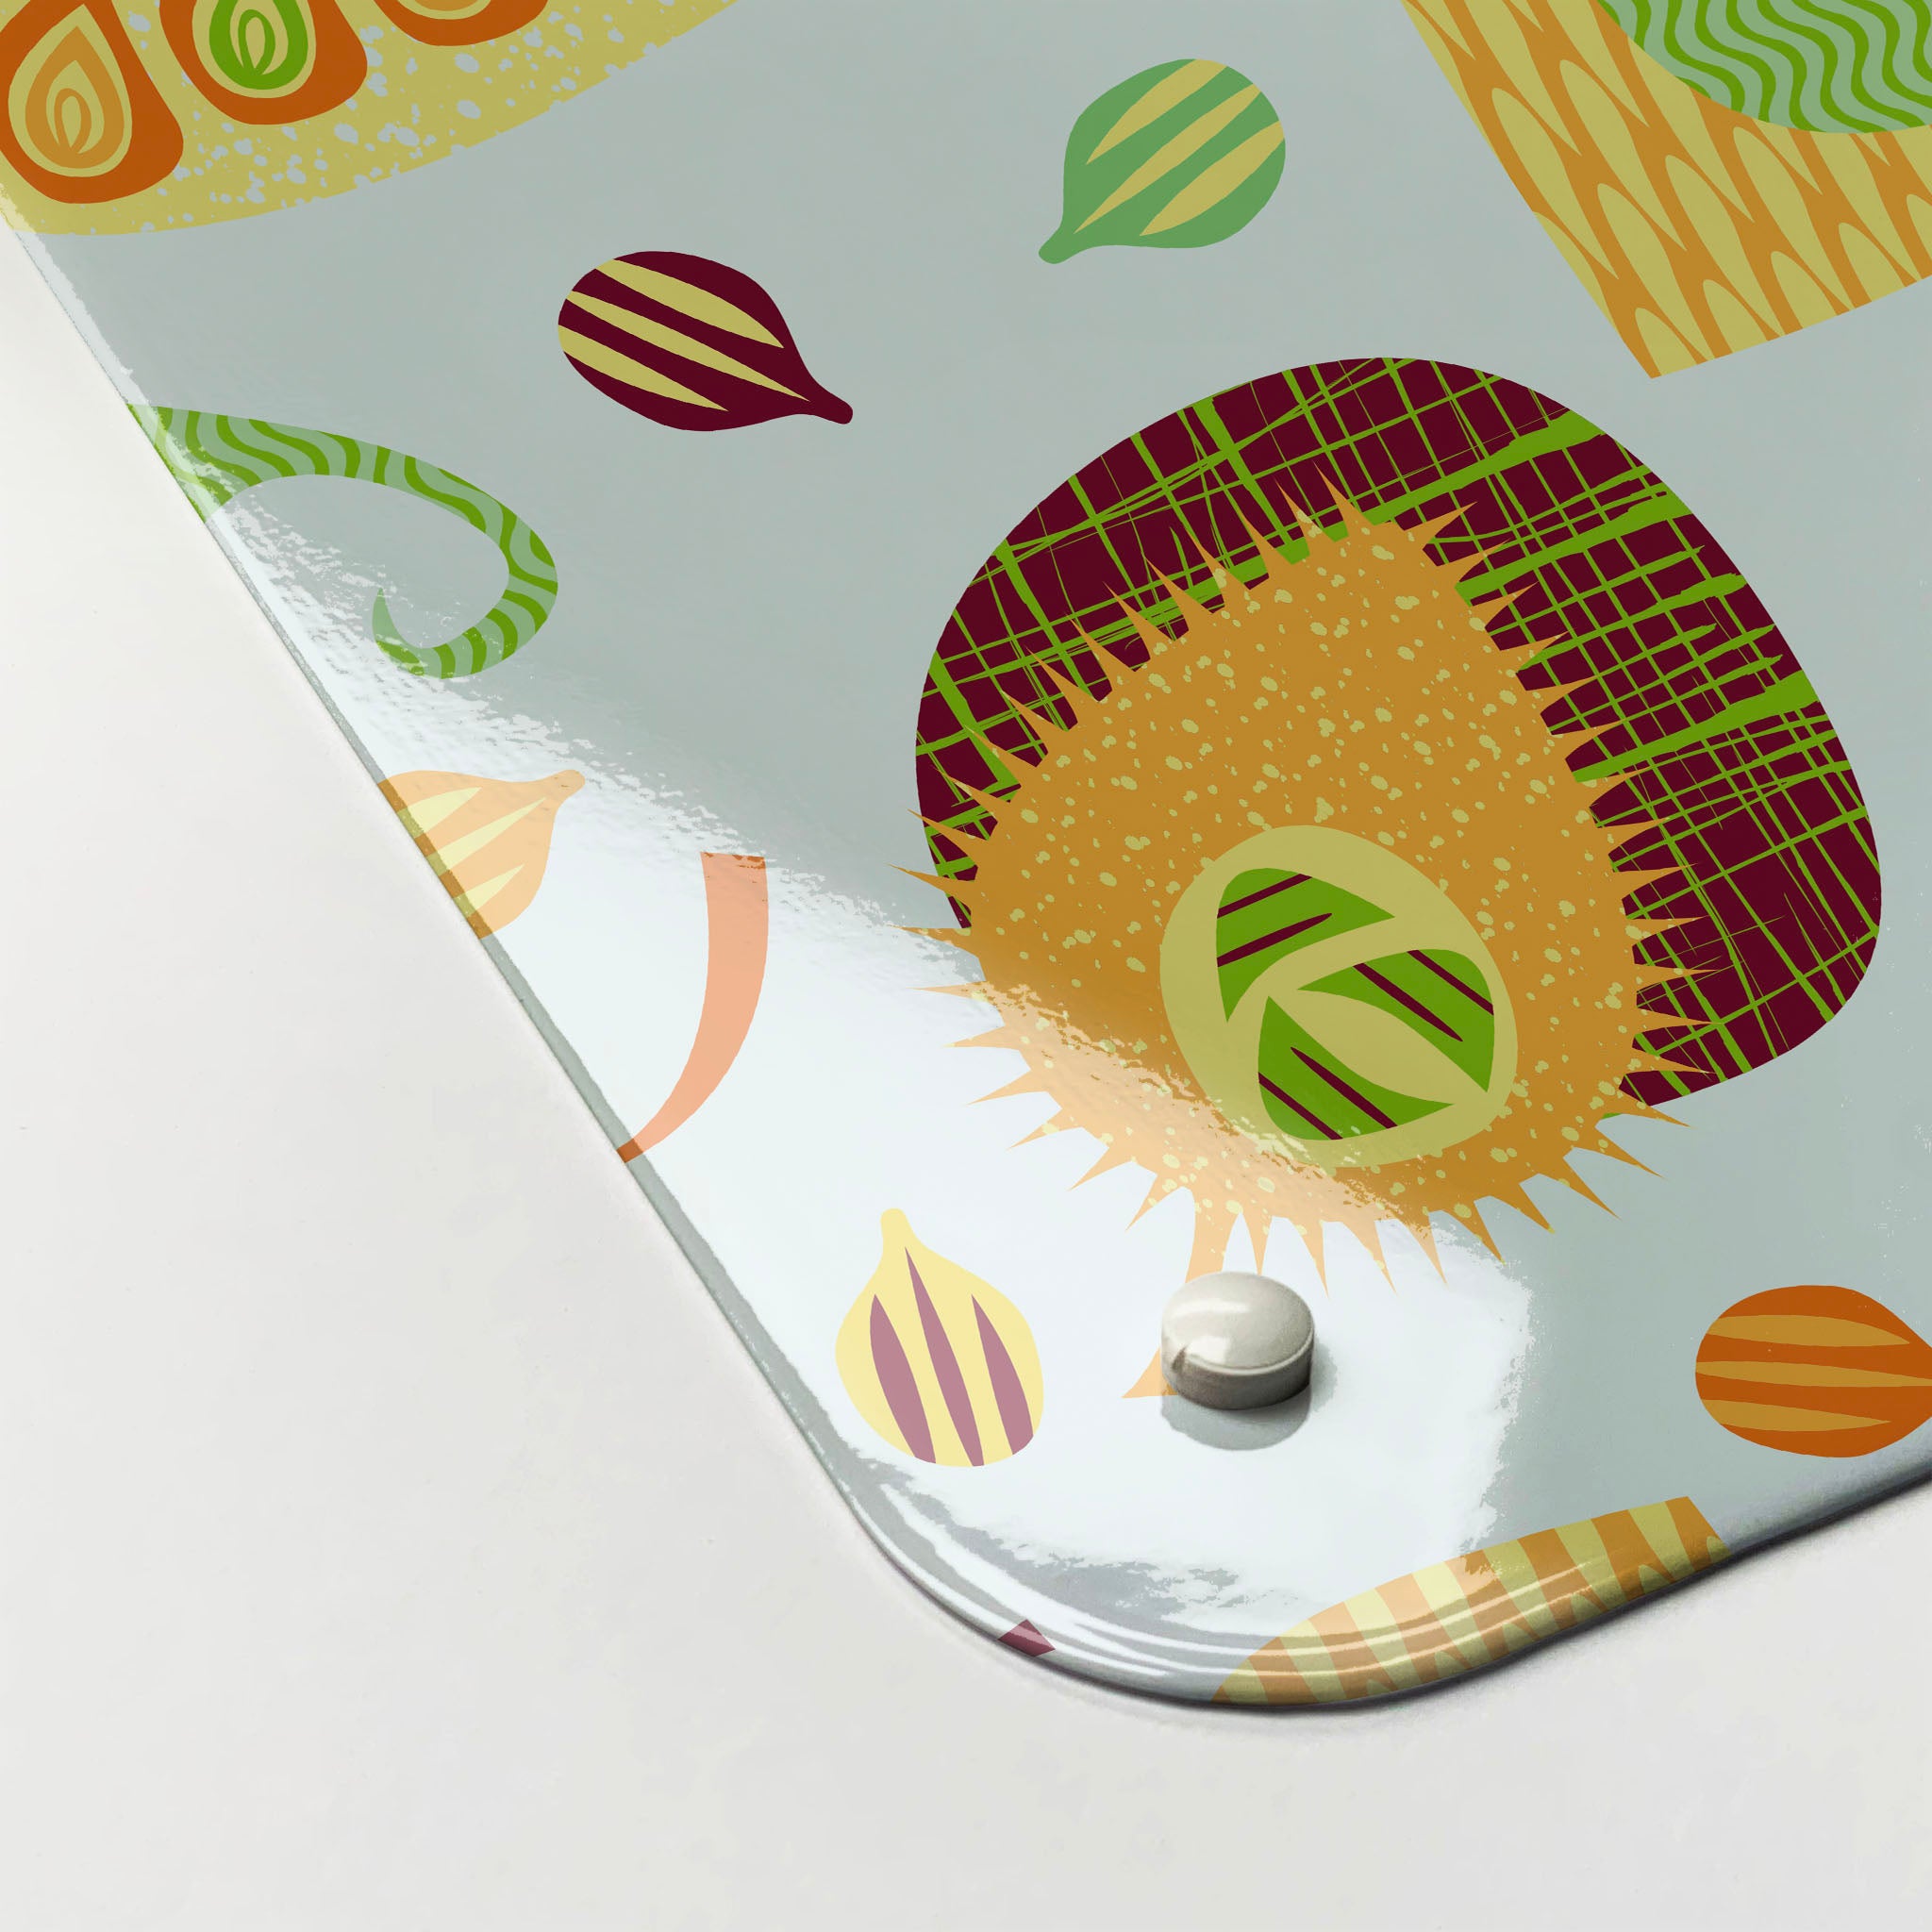 The corner detail of an exotic fruit design magnetic board to show it’s high gloss surface